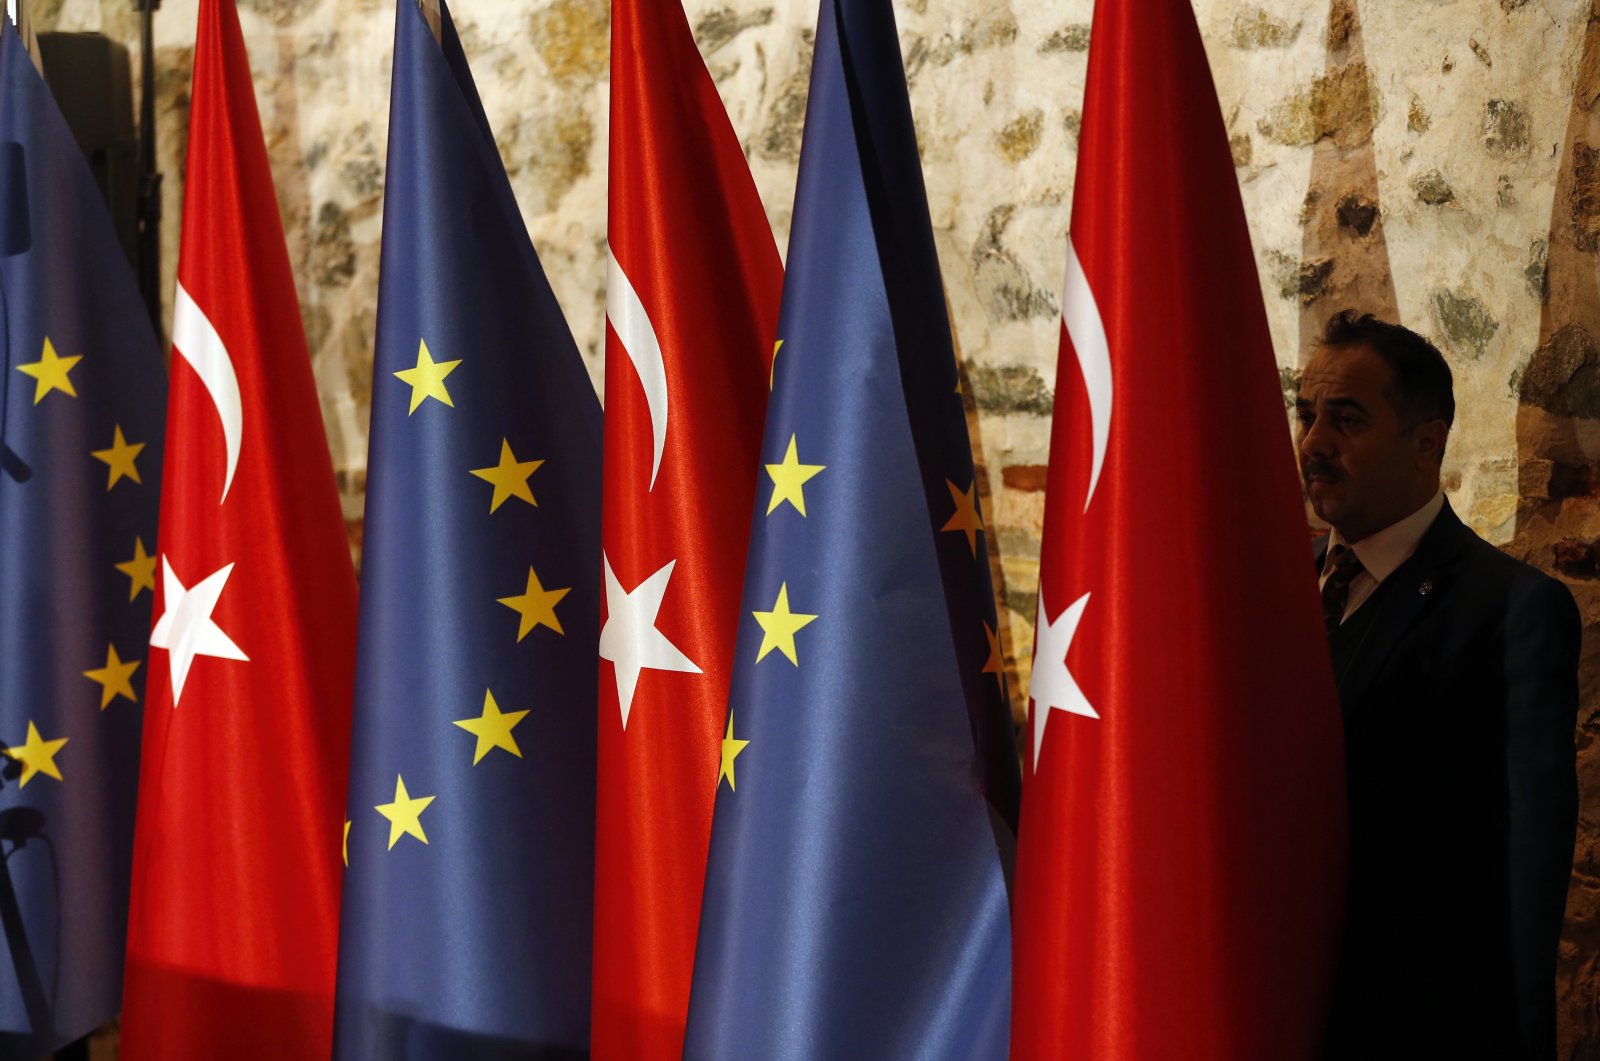 An official adjusts Turkish and European Union flags prior to the opening session of a high-level meeting between the EU and Türkiye, Istanbul, Türkiye, Feb. 28, 2019. (AP File Photo)